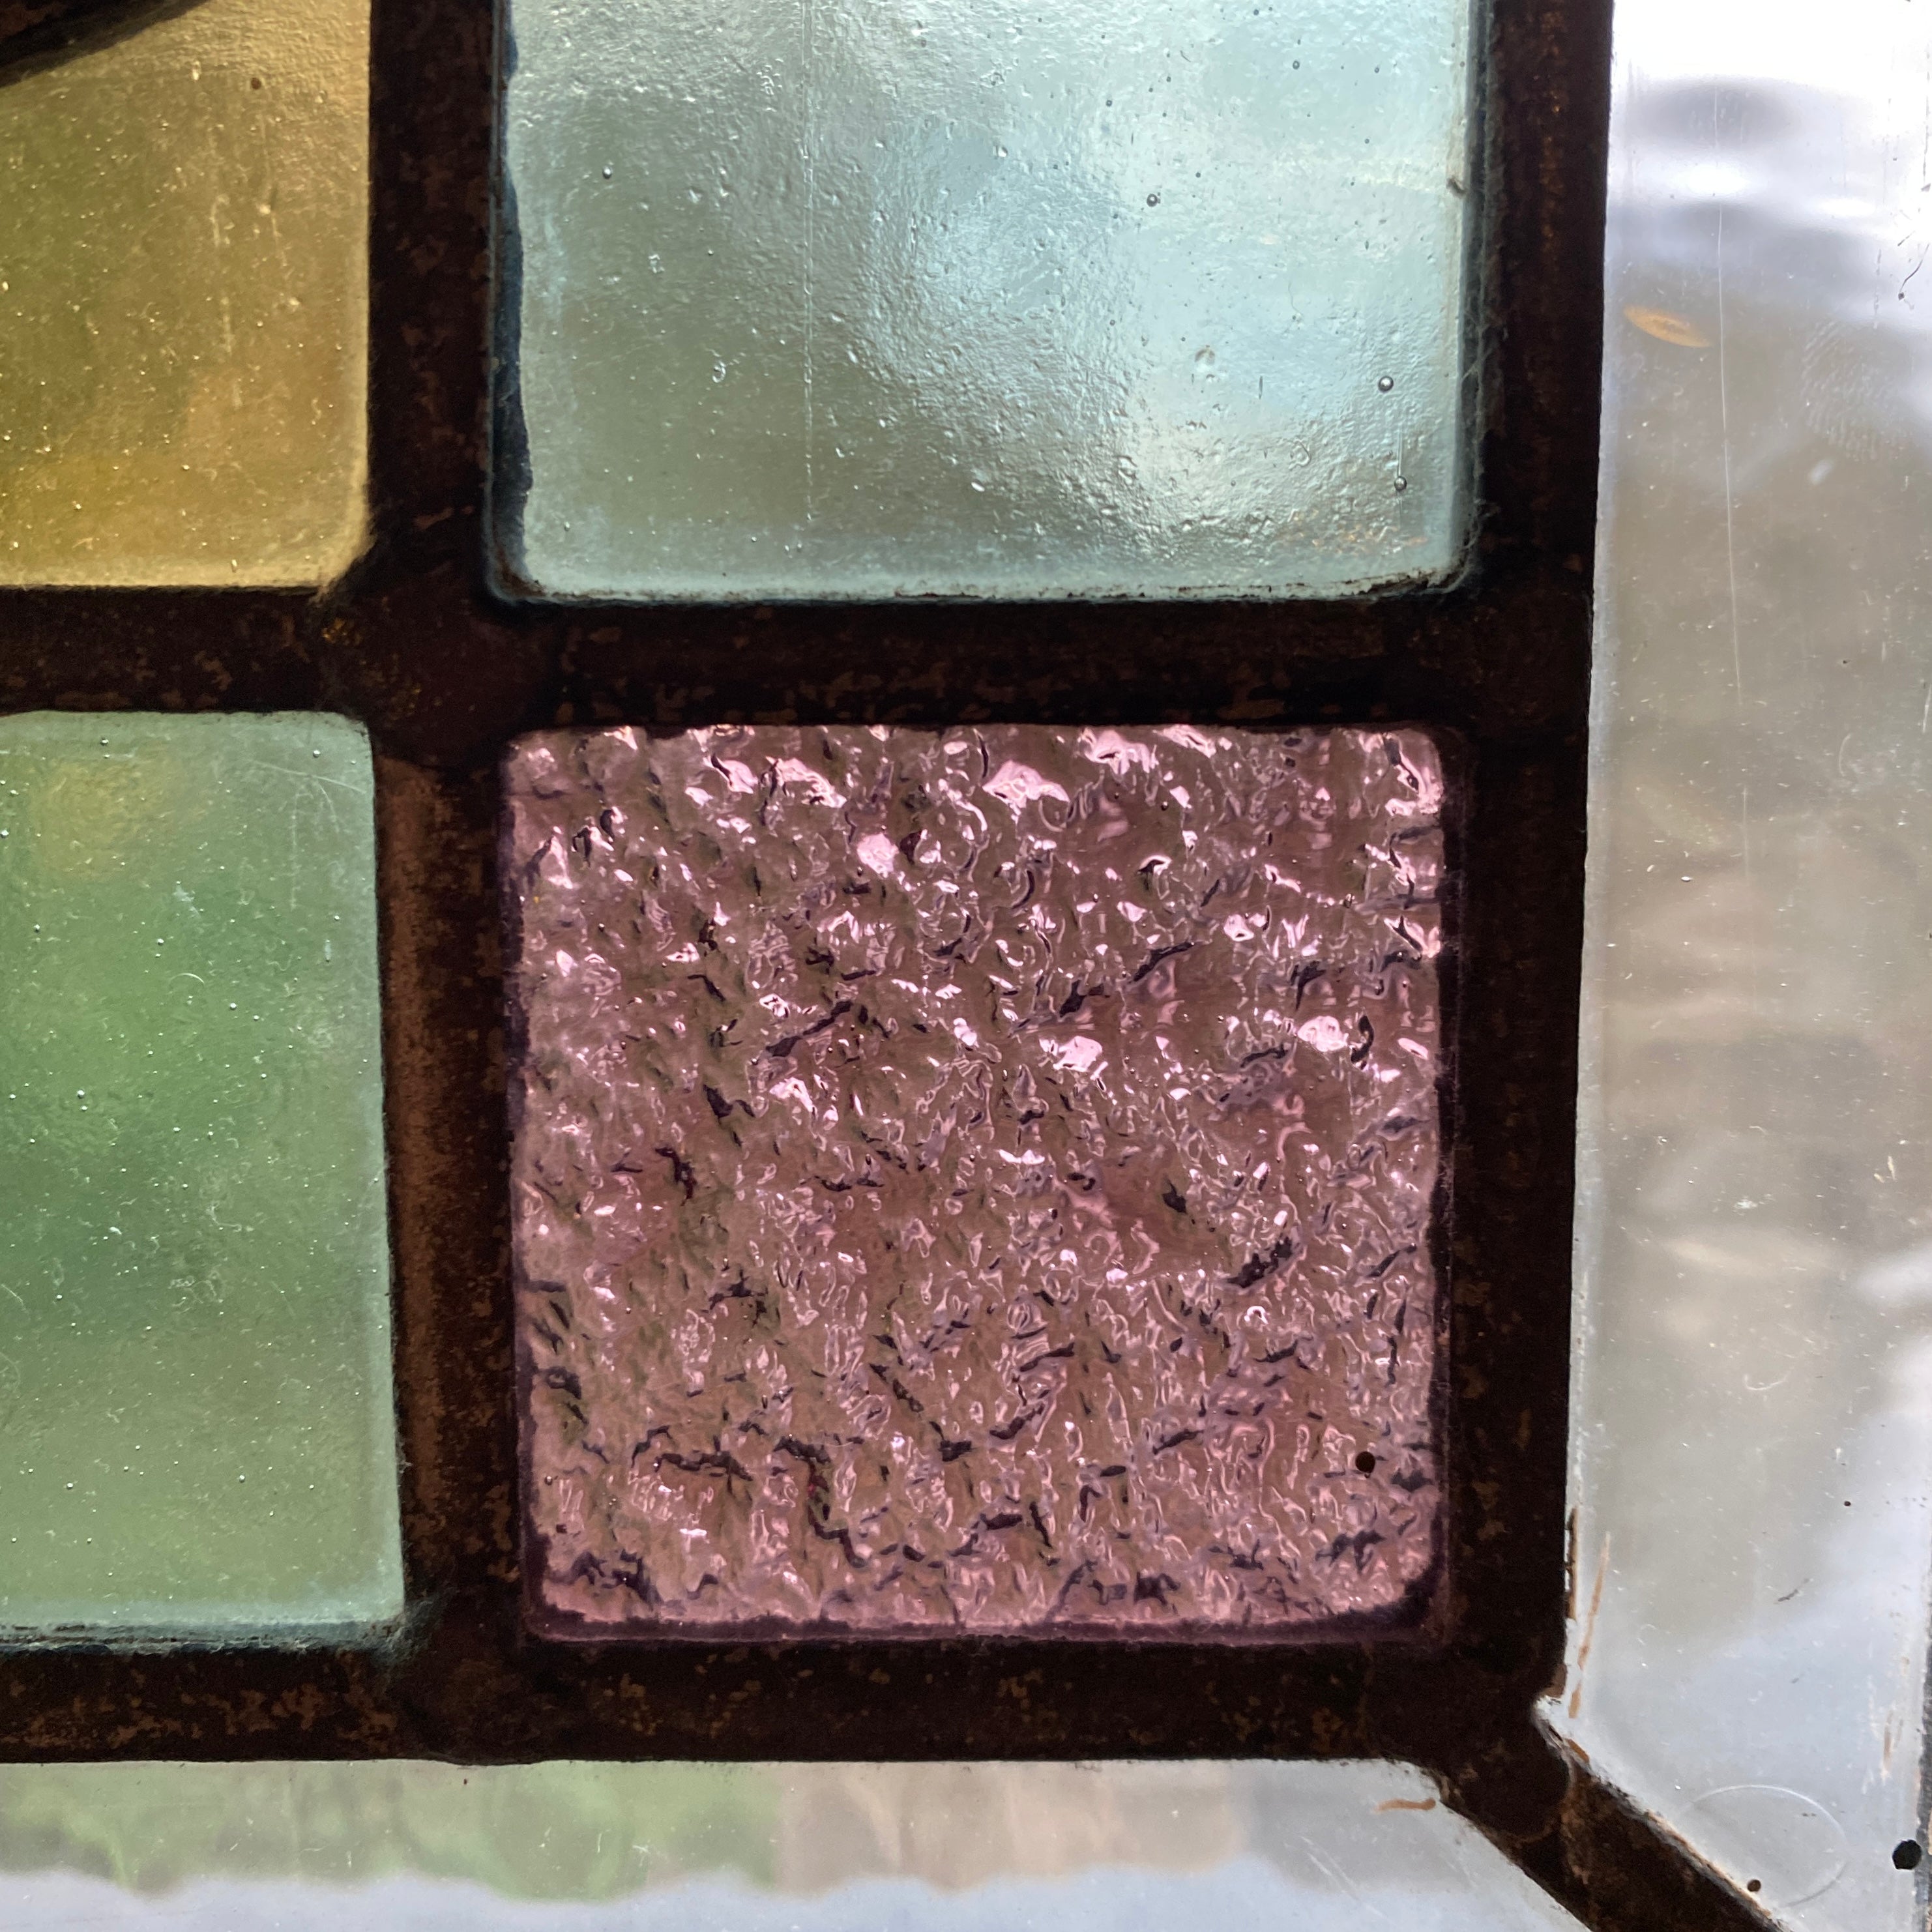 Pink Stained Glass